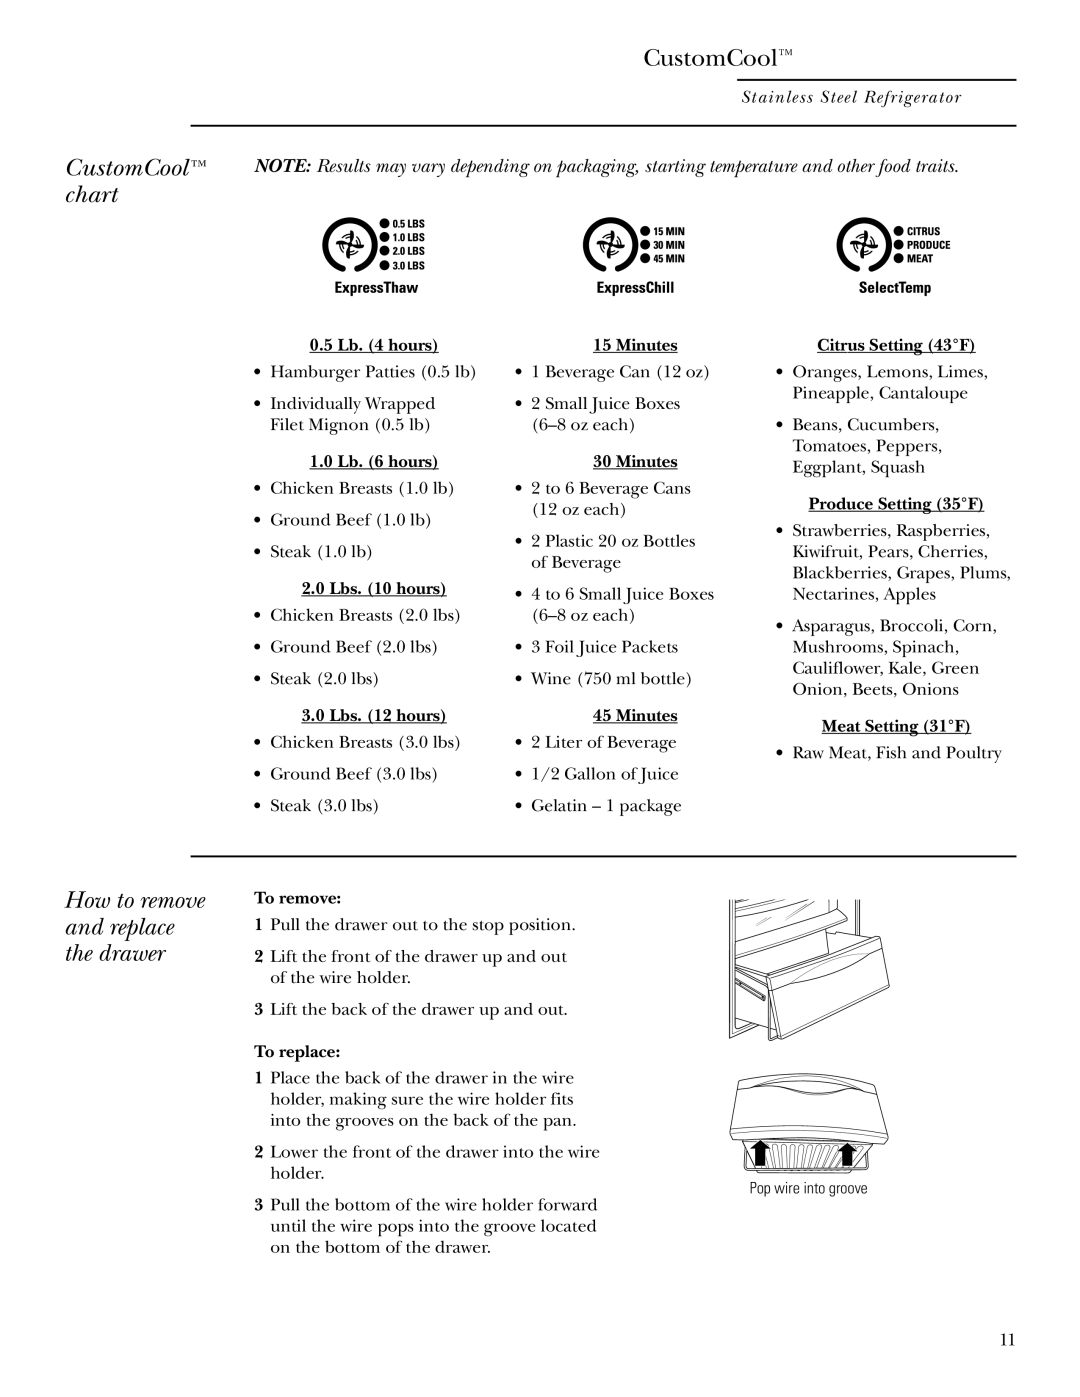 GE r10965v-1 owner manual CustomCool chart, How to remove and replace the drawer 